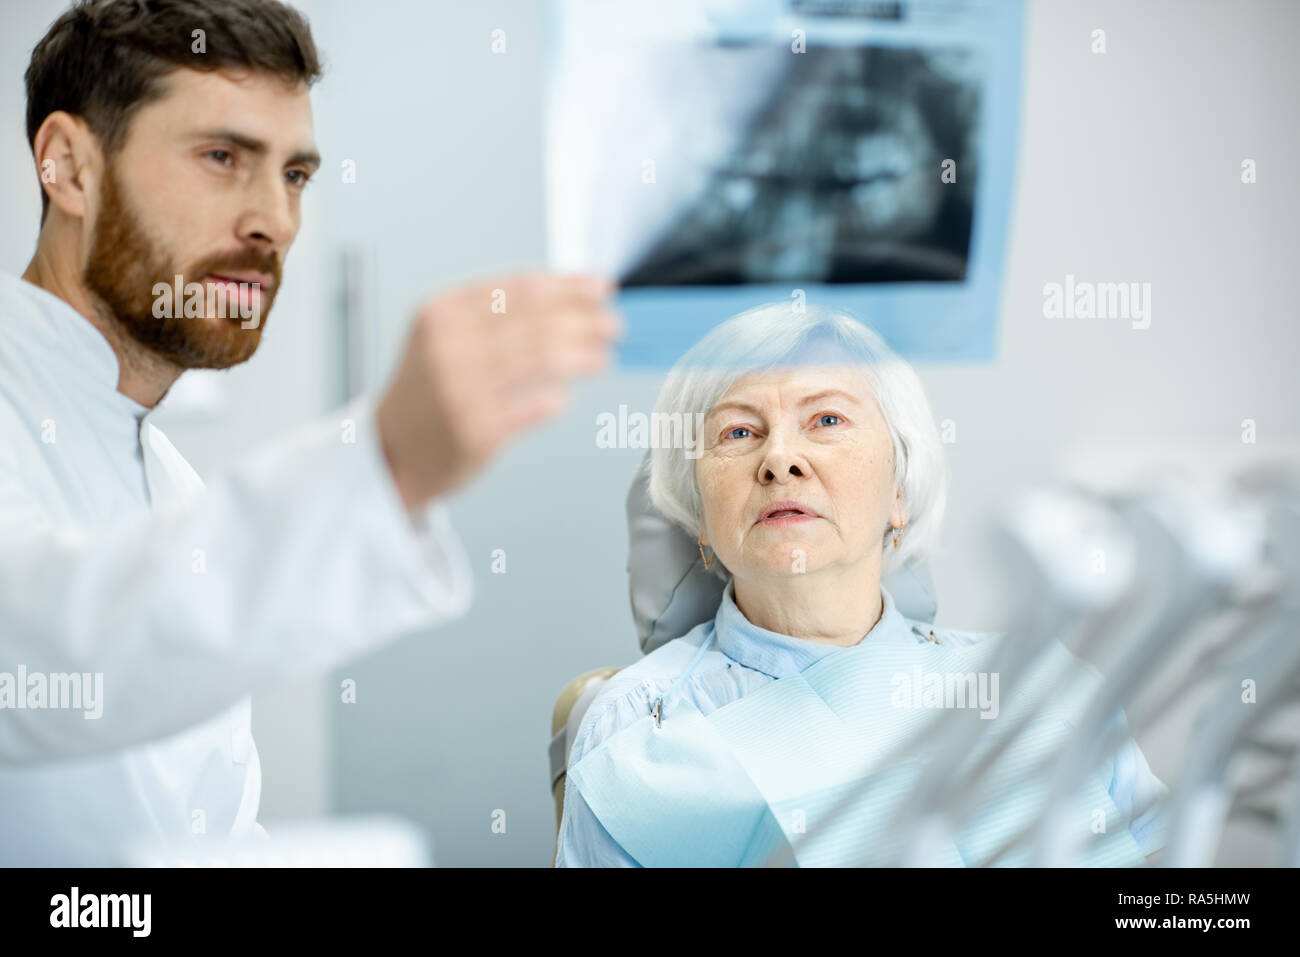 Worried elder woman during the consultation with handsome dentist showing panoramic x-ray in the dental office Stock Photo